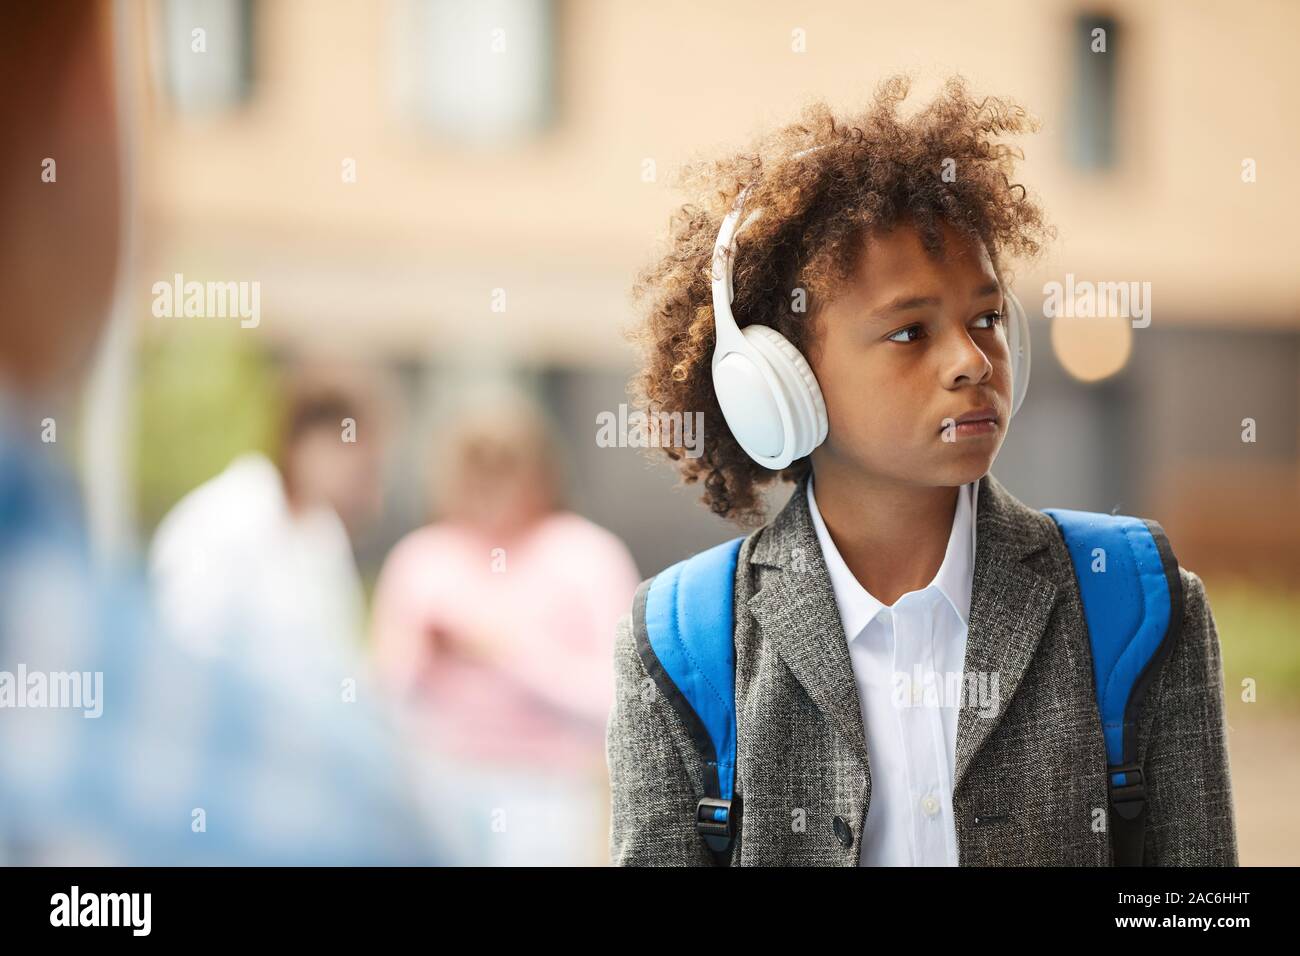 African schoolboy wearing headphones listening to music while walking on the street after school Stock Photo